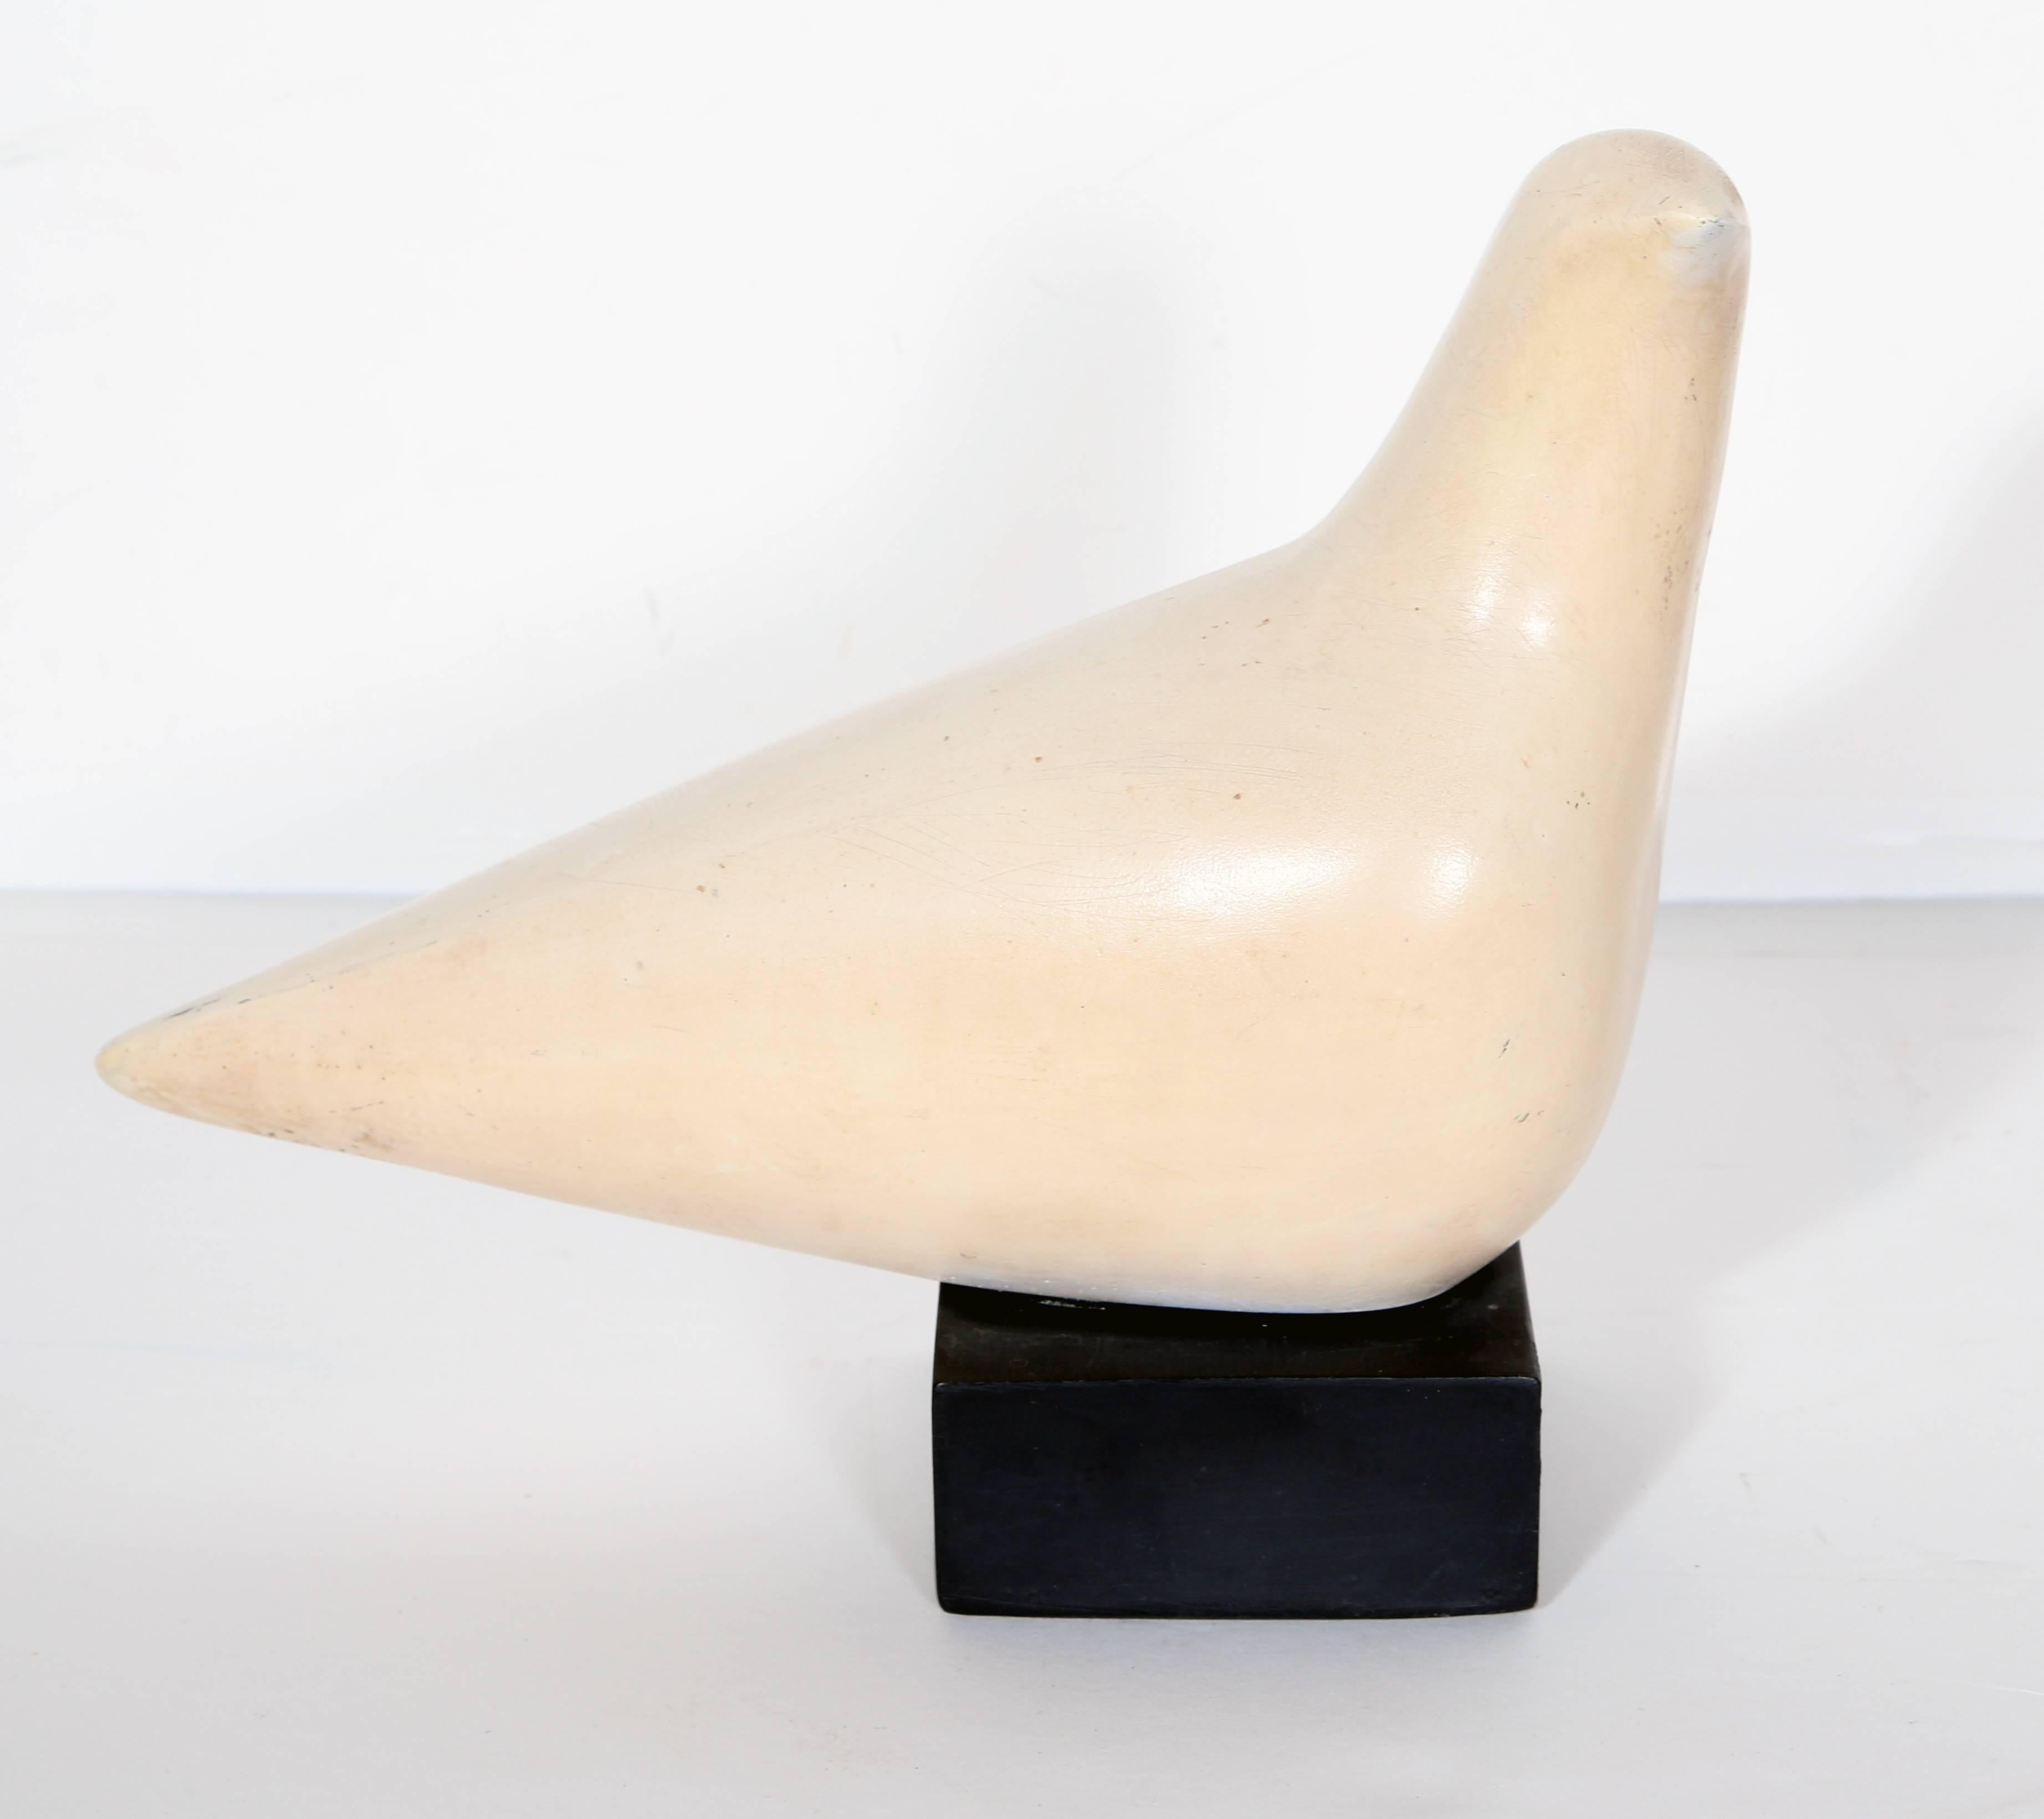 This Art Deco dove is a resin sculpture by American artist Cleo Hartwig, created circa 1960. Hartwig's curiosity and interest in natural forms, she says, come from her childhood memories outside: There is such rich and endless variety in nature that